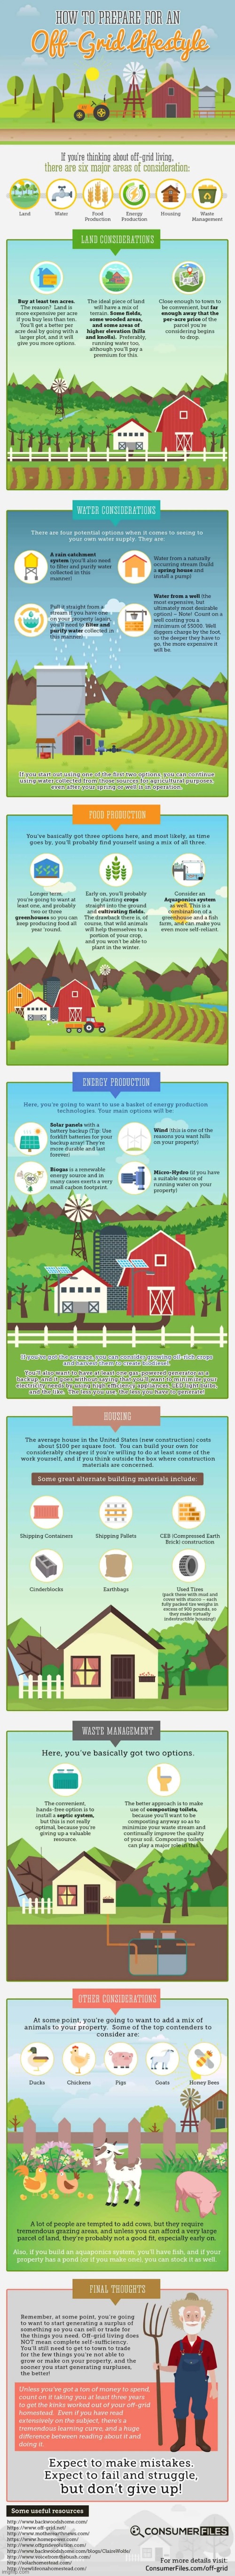 How To Prepare For An Off-The-Grid Lifestyle :> | image tagged in simothefinlandized,off the grid,lifestyle,infographic,tutorial | made w/ Imgflip meme maker